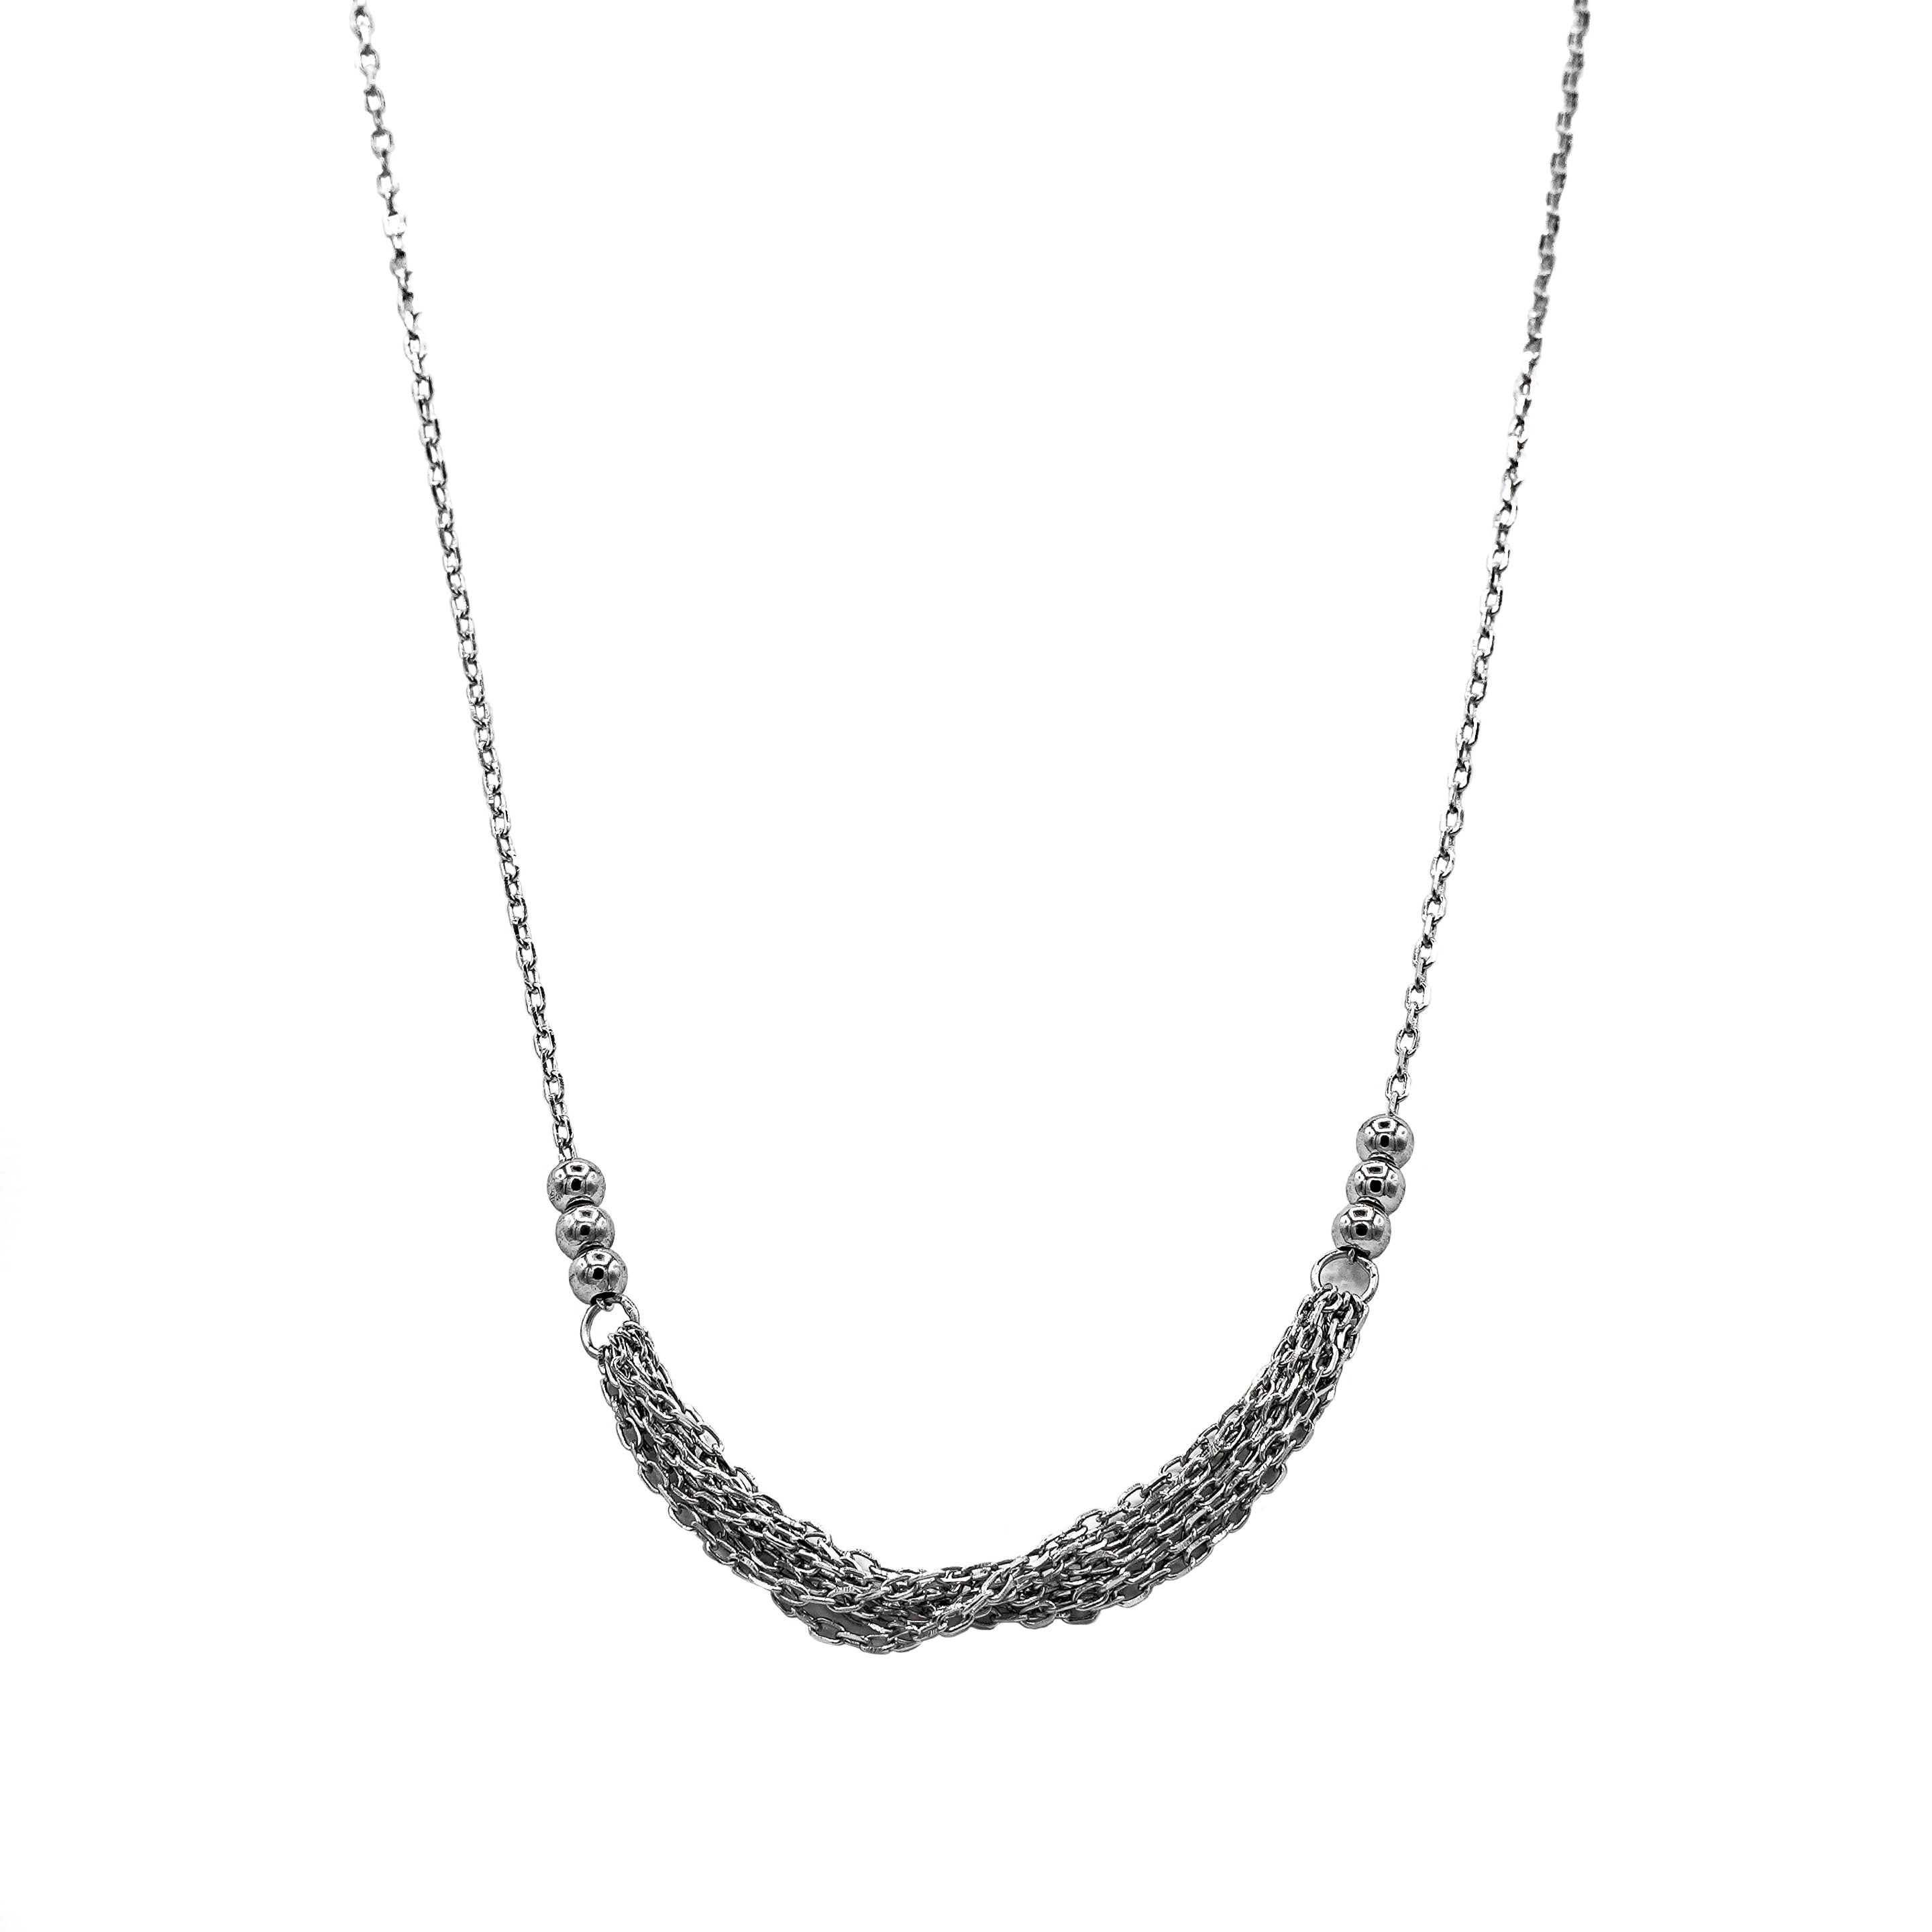 .925 7 Strand Silver Cable Necklace